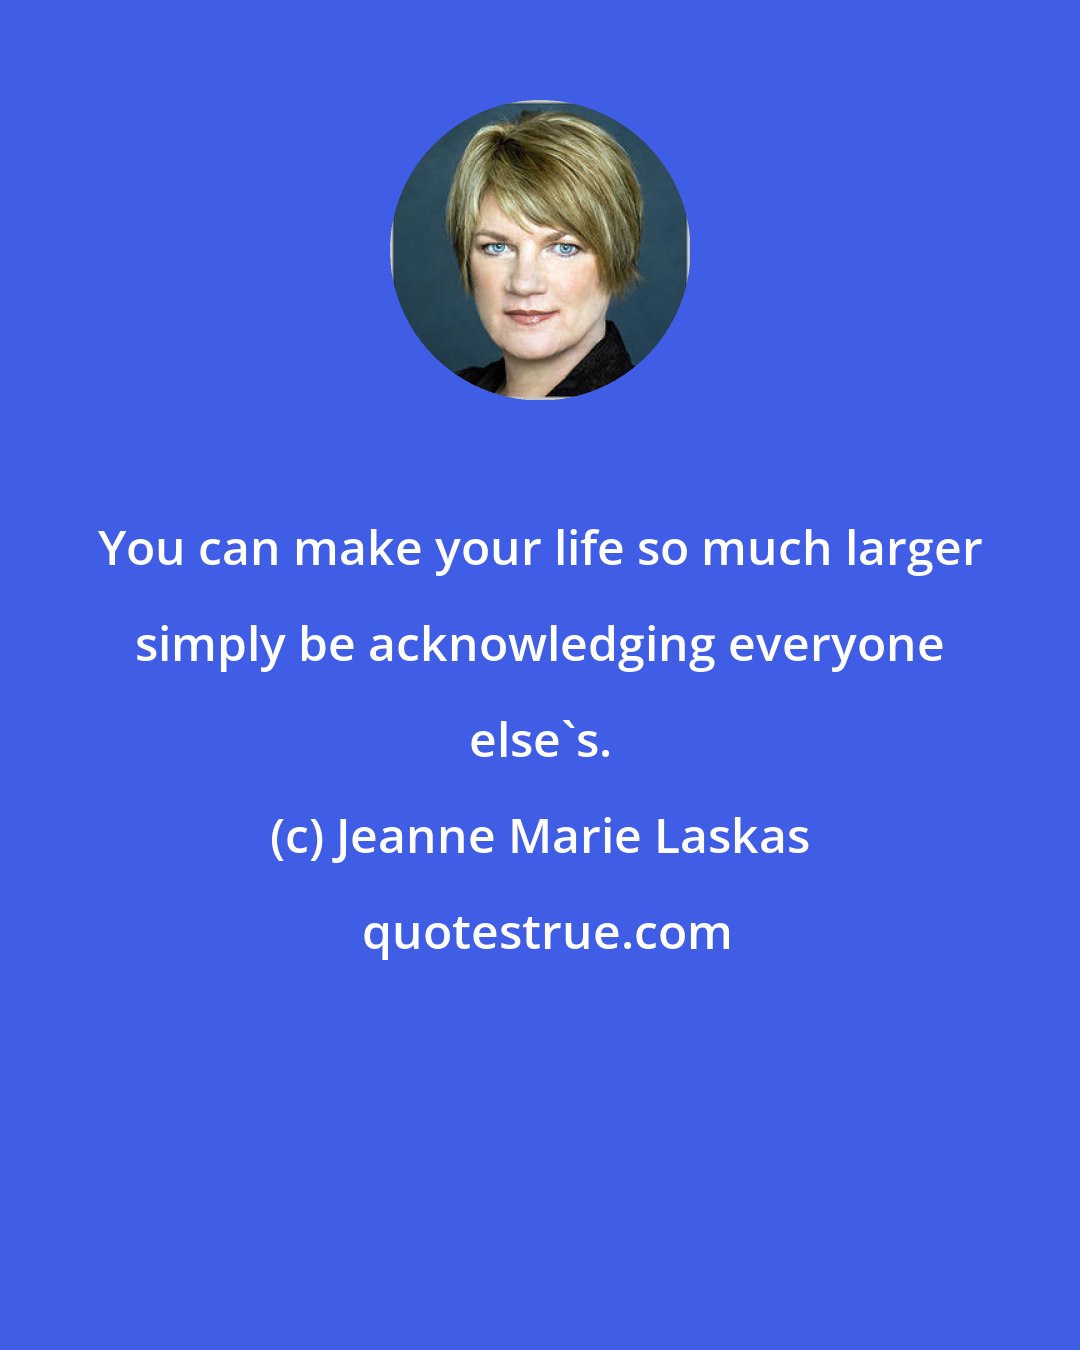 Jeanne Marie Laskas: You can make your life so much larger simply be acknowledging everyone else's.